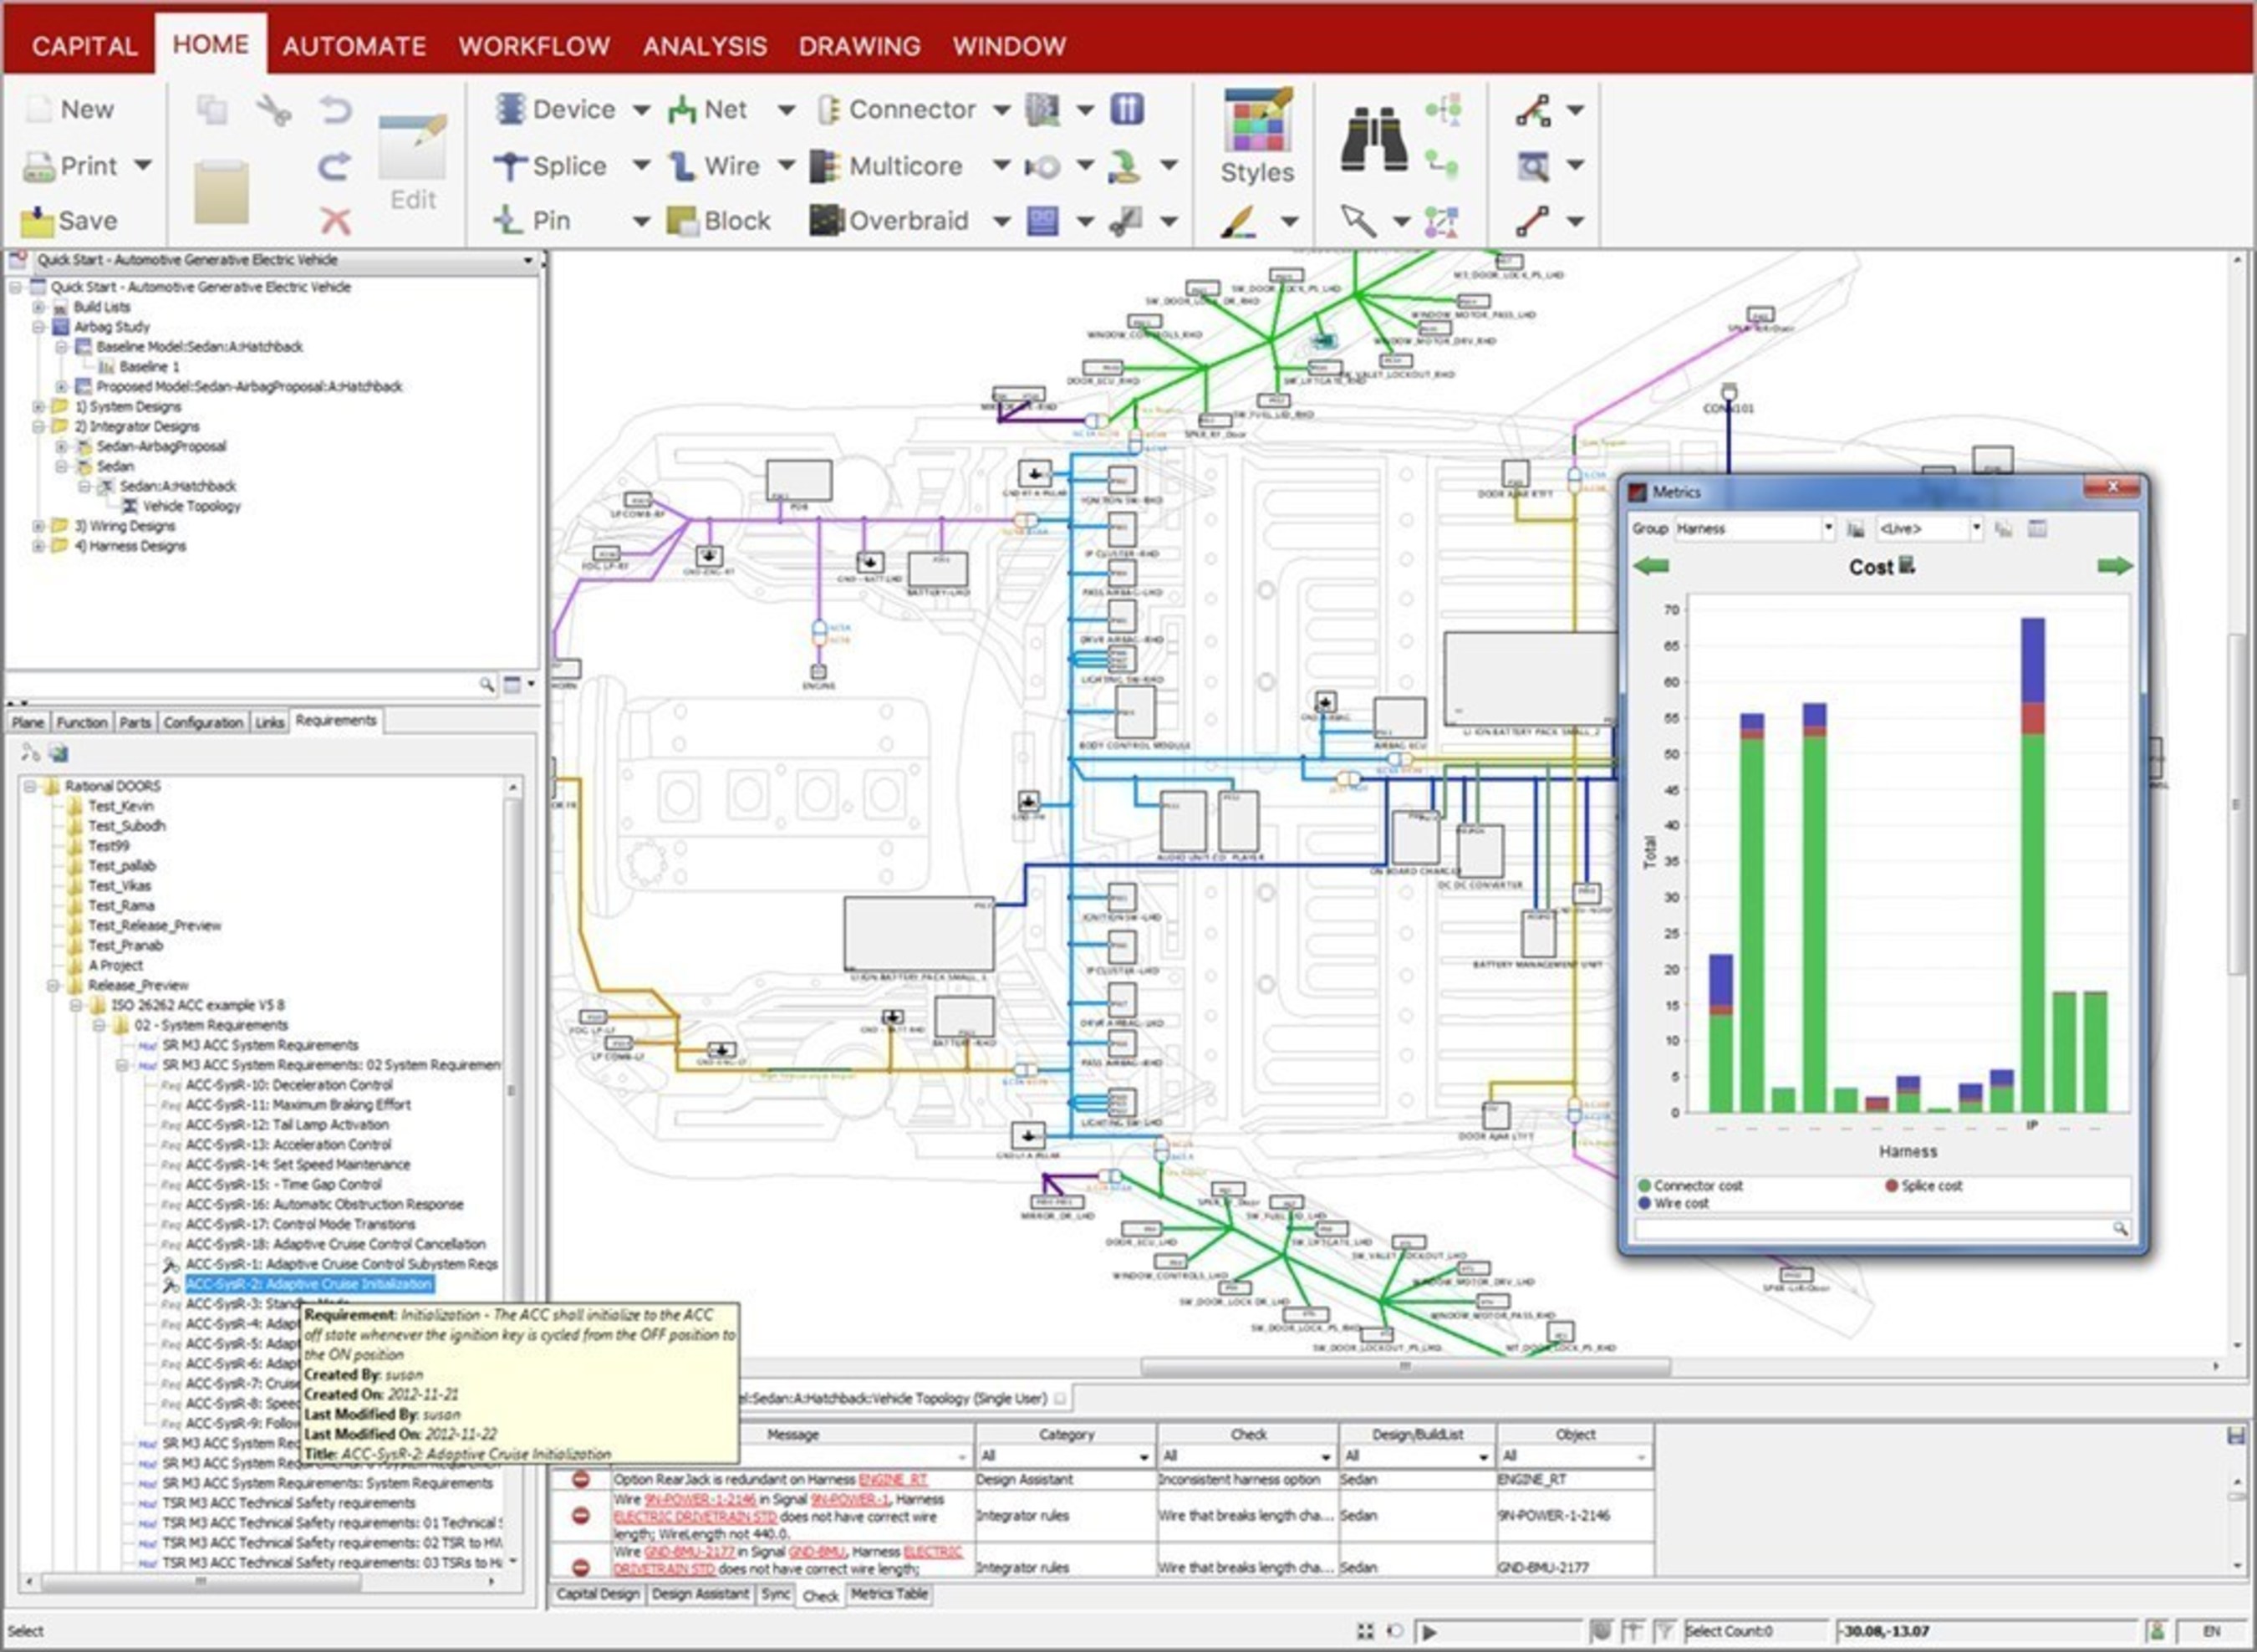 Capital tools at Lear include connectivity capture, platform level wiring synthesis, design optimization & verification, and electrical simulation.